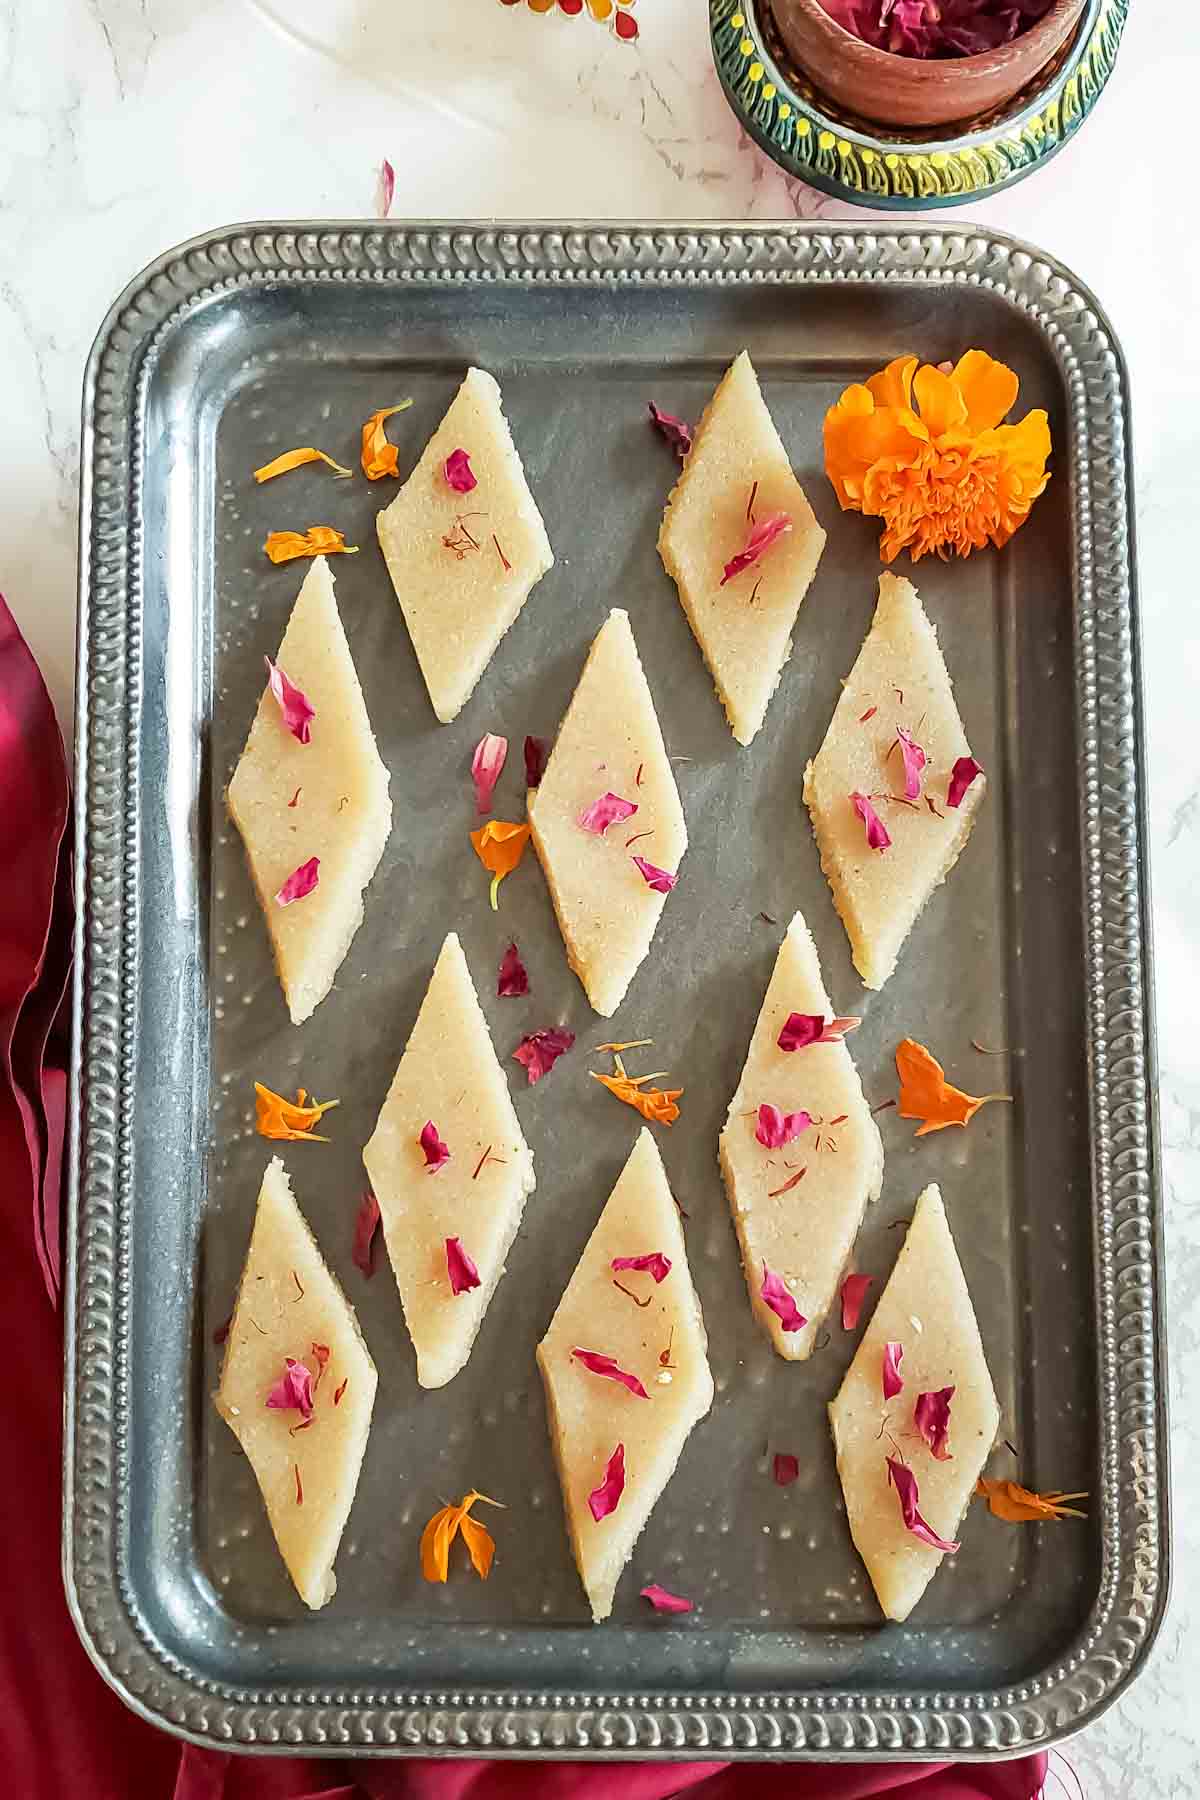 A try full of badam burfi garnishes with saffron and rose petals.